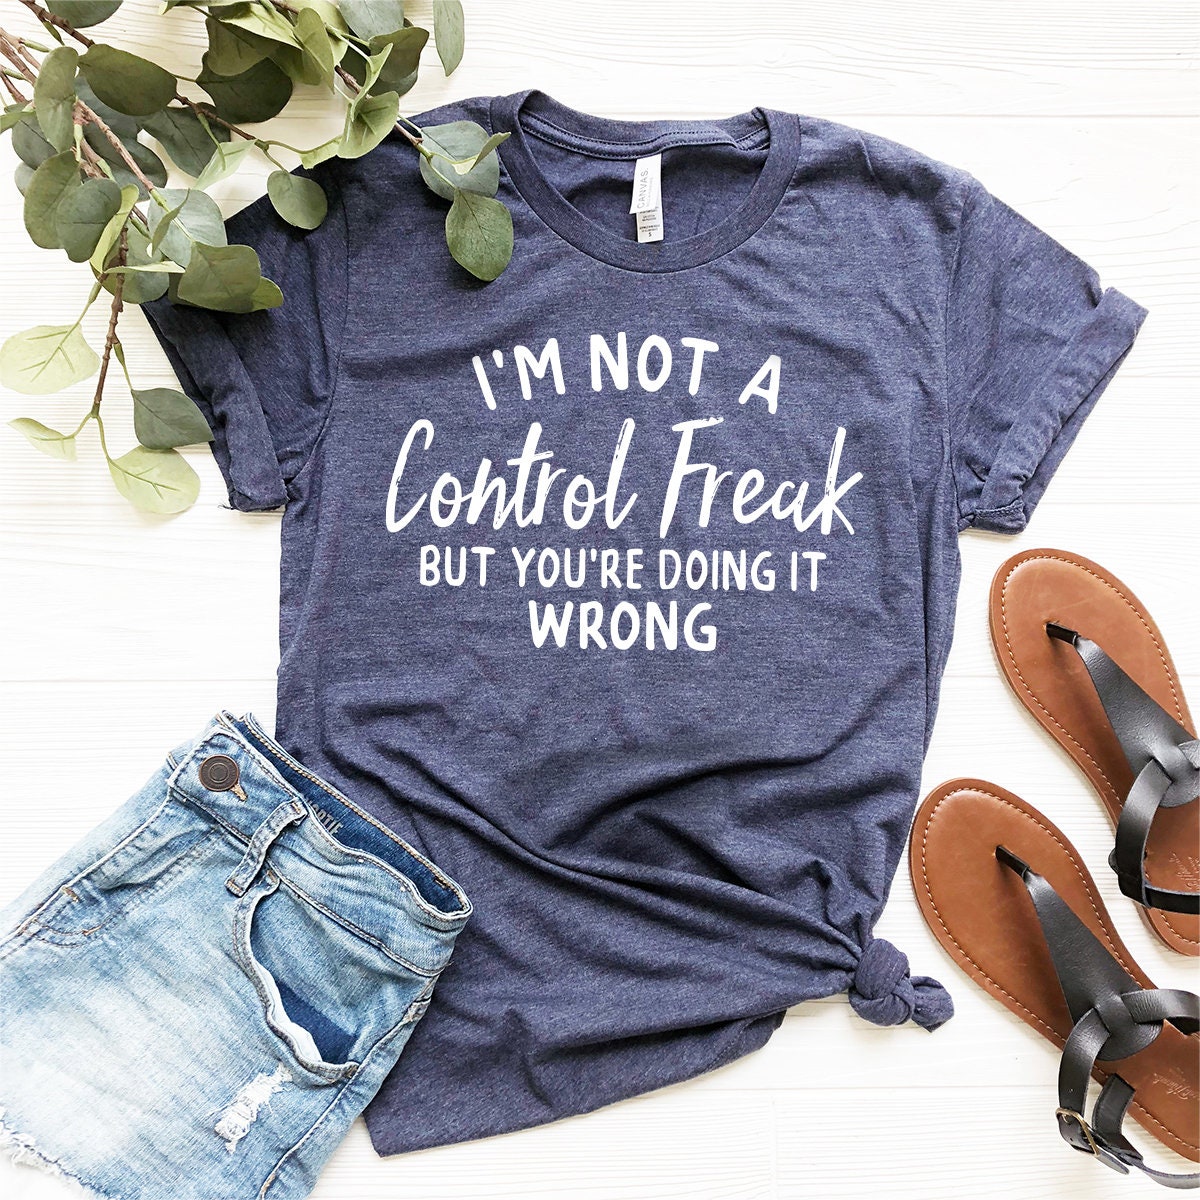 Funny Saying Shirt, Sarcastic T-Shirt, Control Freak Shirt, I'm Not A Control Freak Shirt, You're Doing It Wrong Tee, Funny Gift For Friend - Fastdeliverytees.com